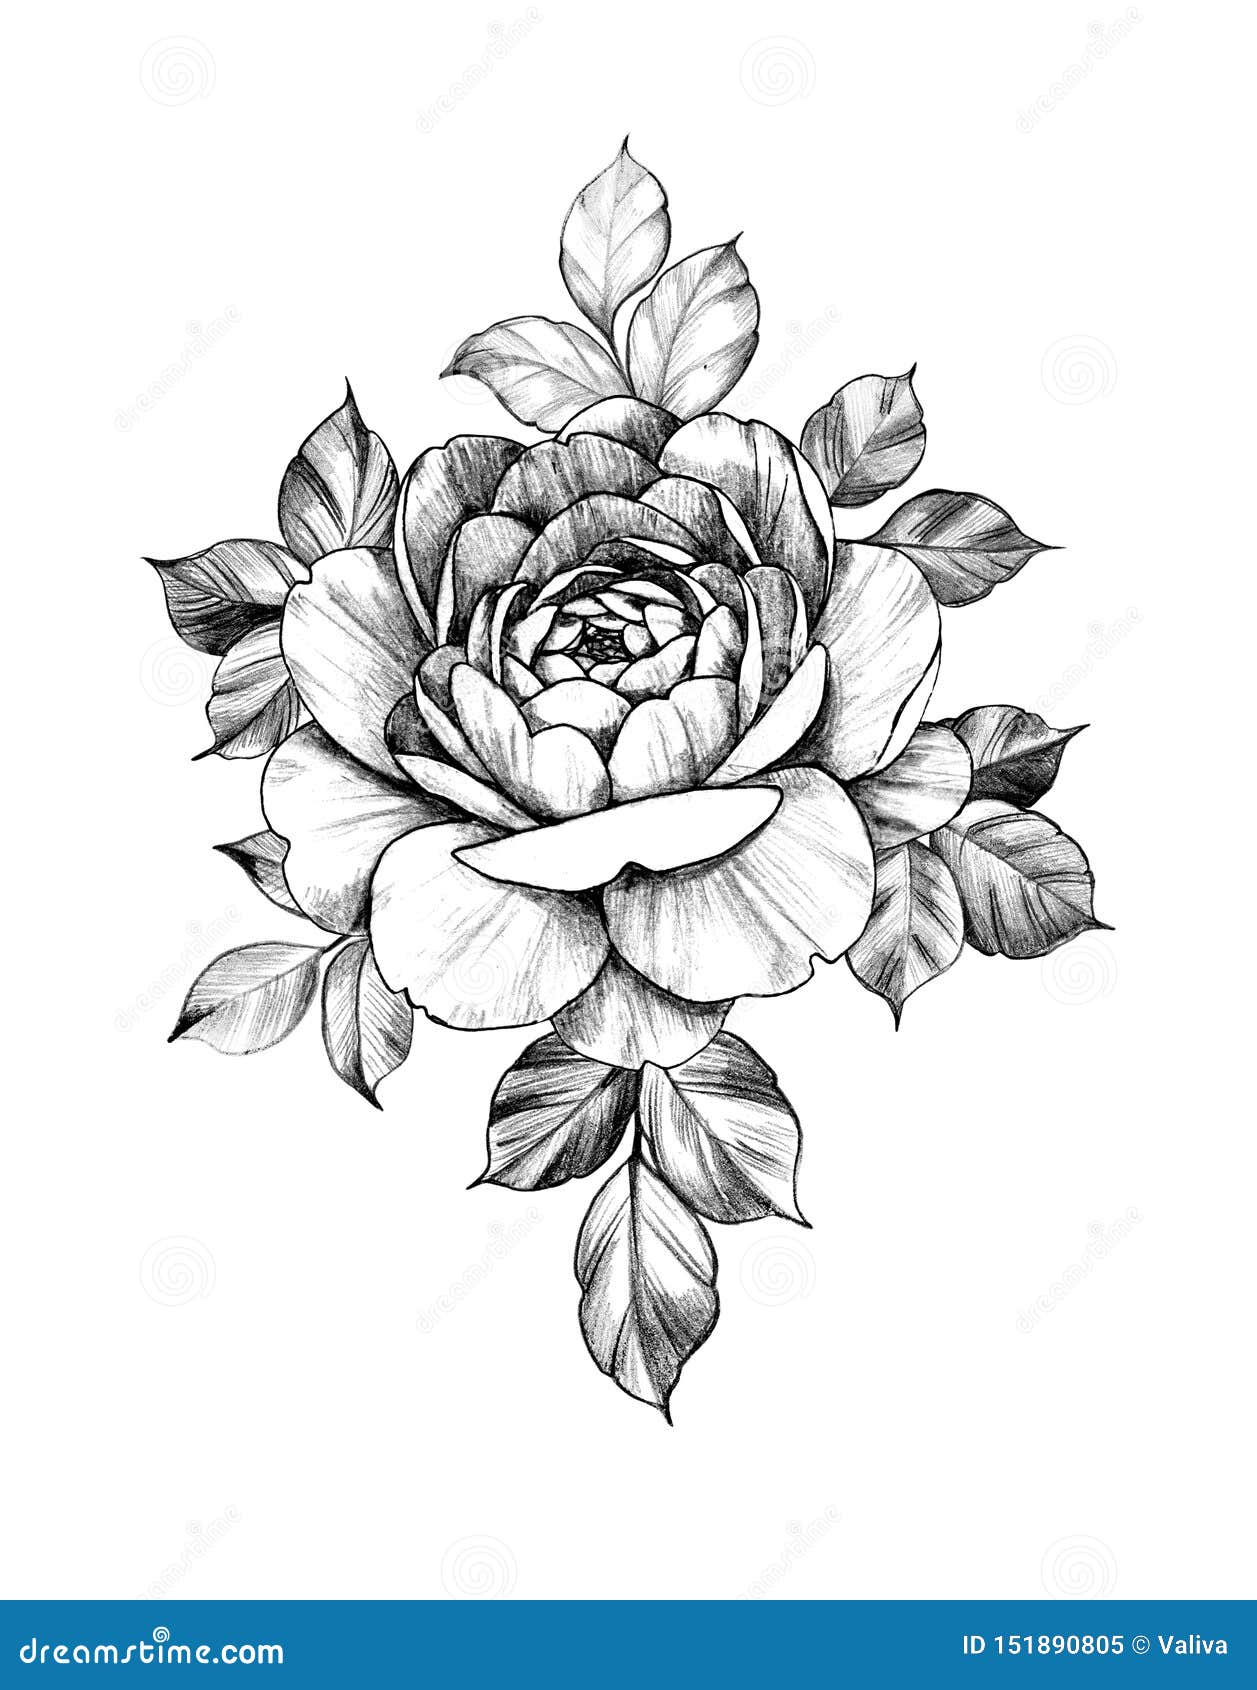 Rose by Ruby Quilter rubymayquilter blackandgrey oldschool illustrative  rose leaves thorns   Rose drawing tattoo Rose thorn tattoo Arm  tattoos for women